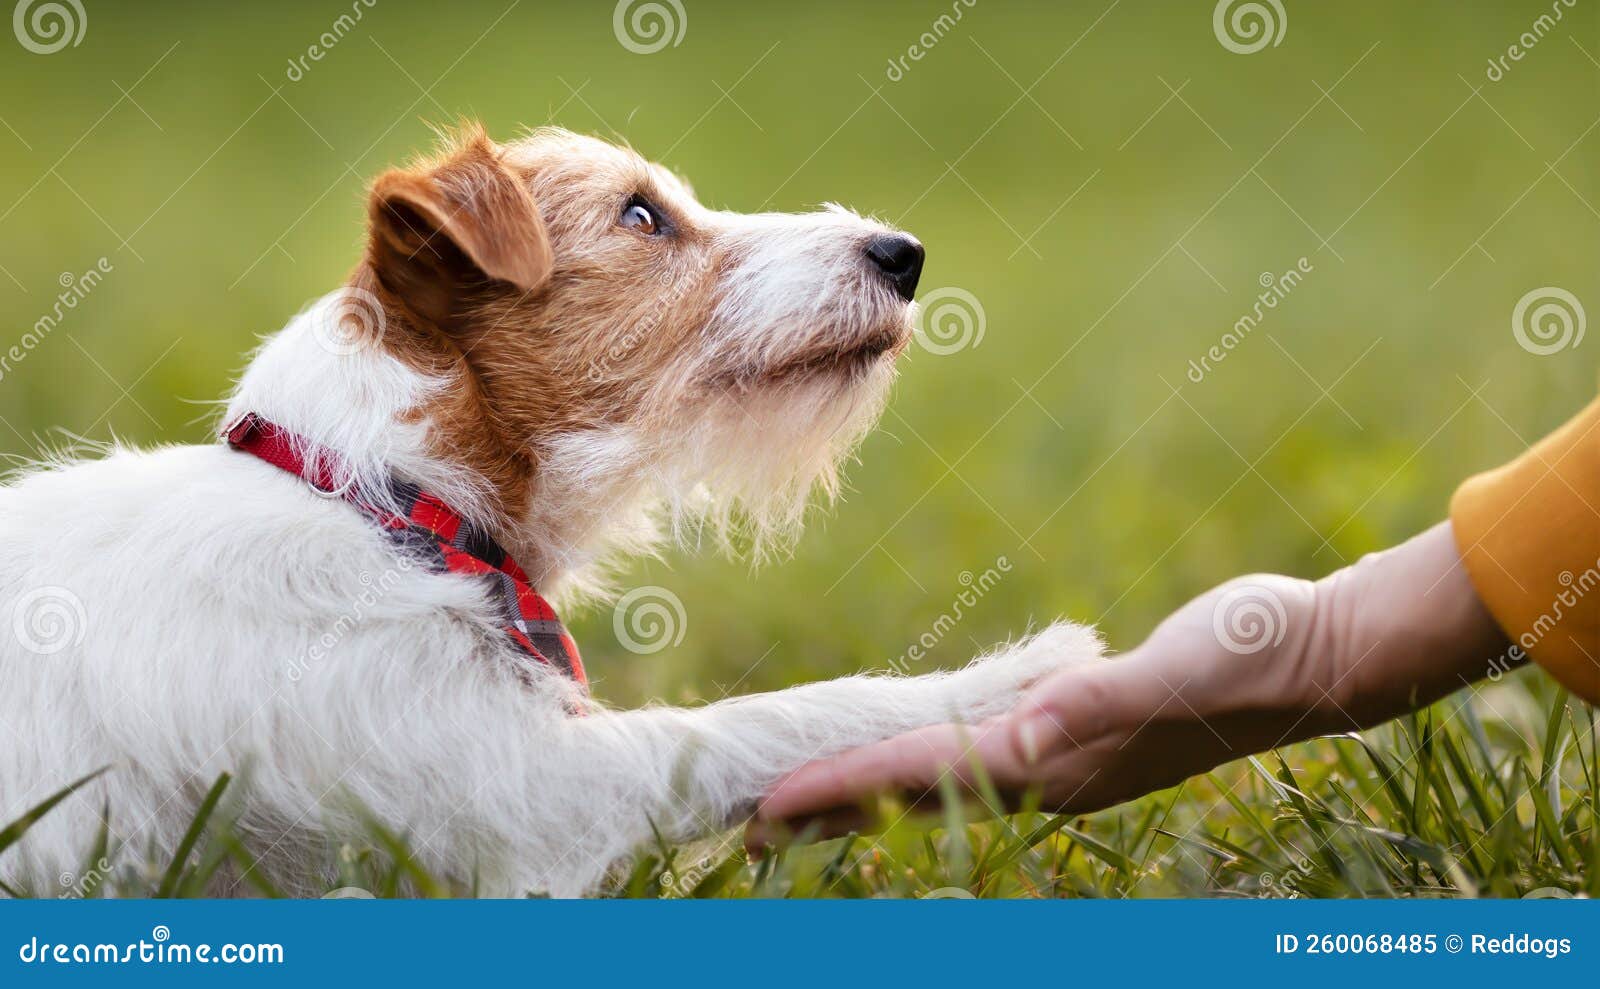 cute pet dog giving paw to her owner trainer, friendship and love of human and animal